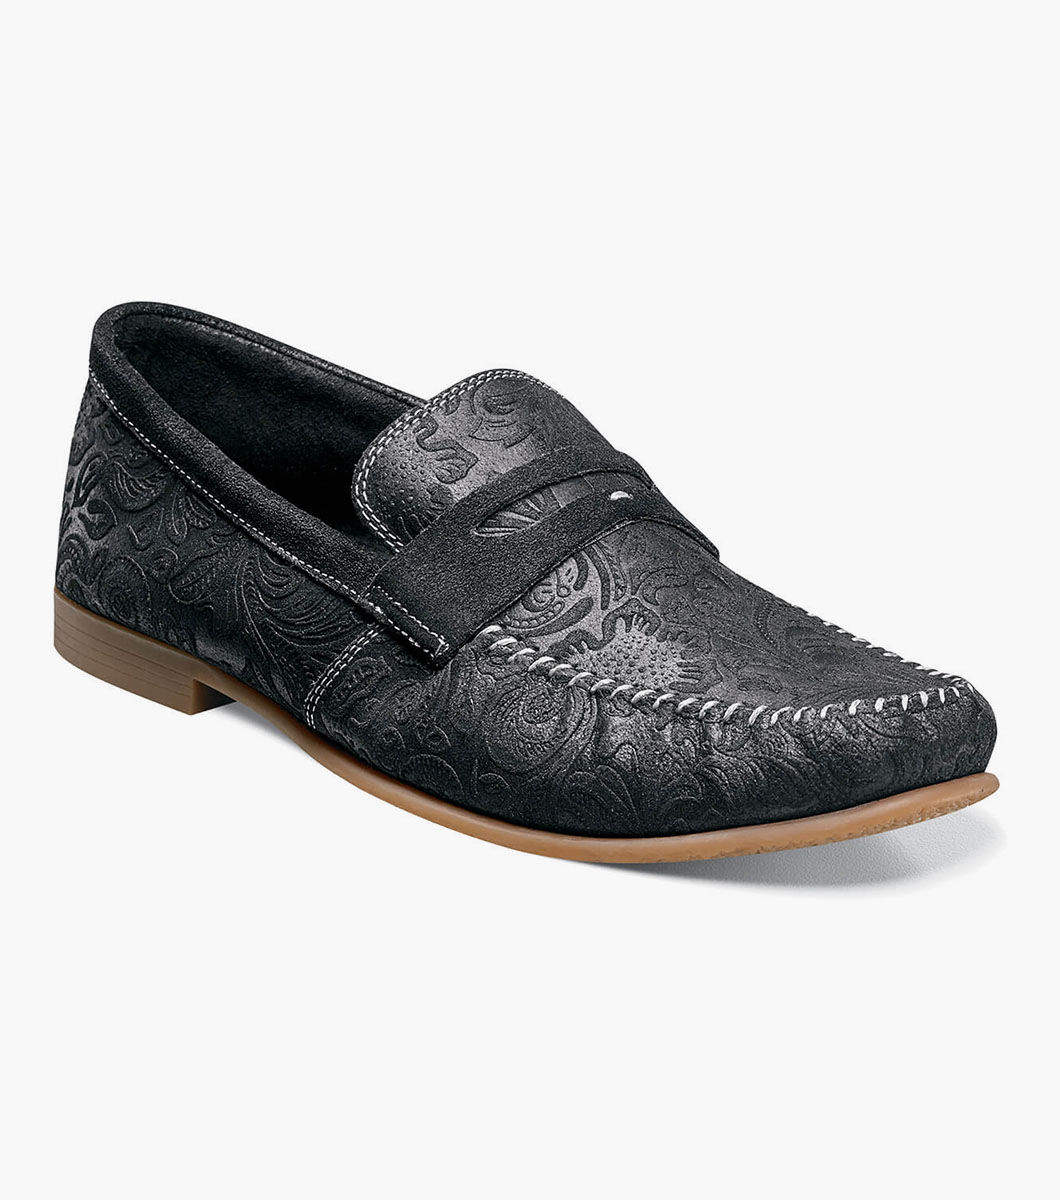 stacy adams penny loafers